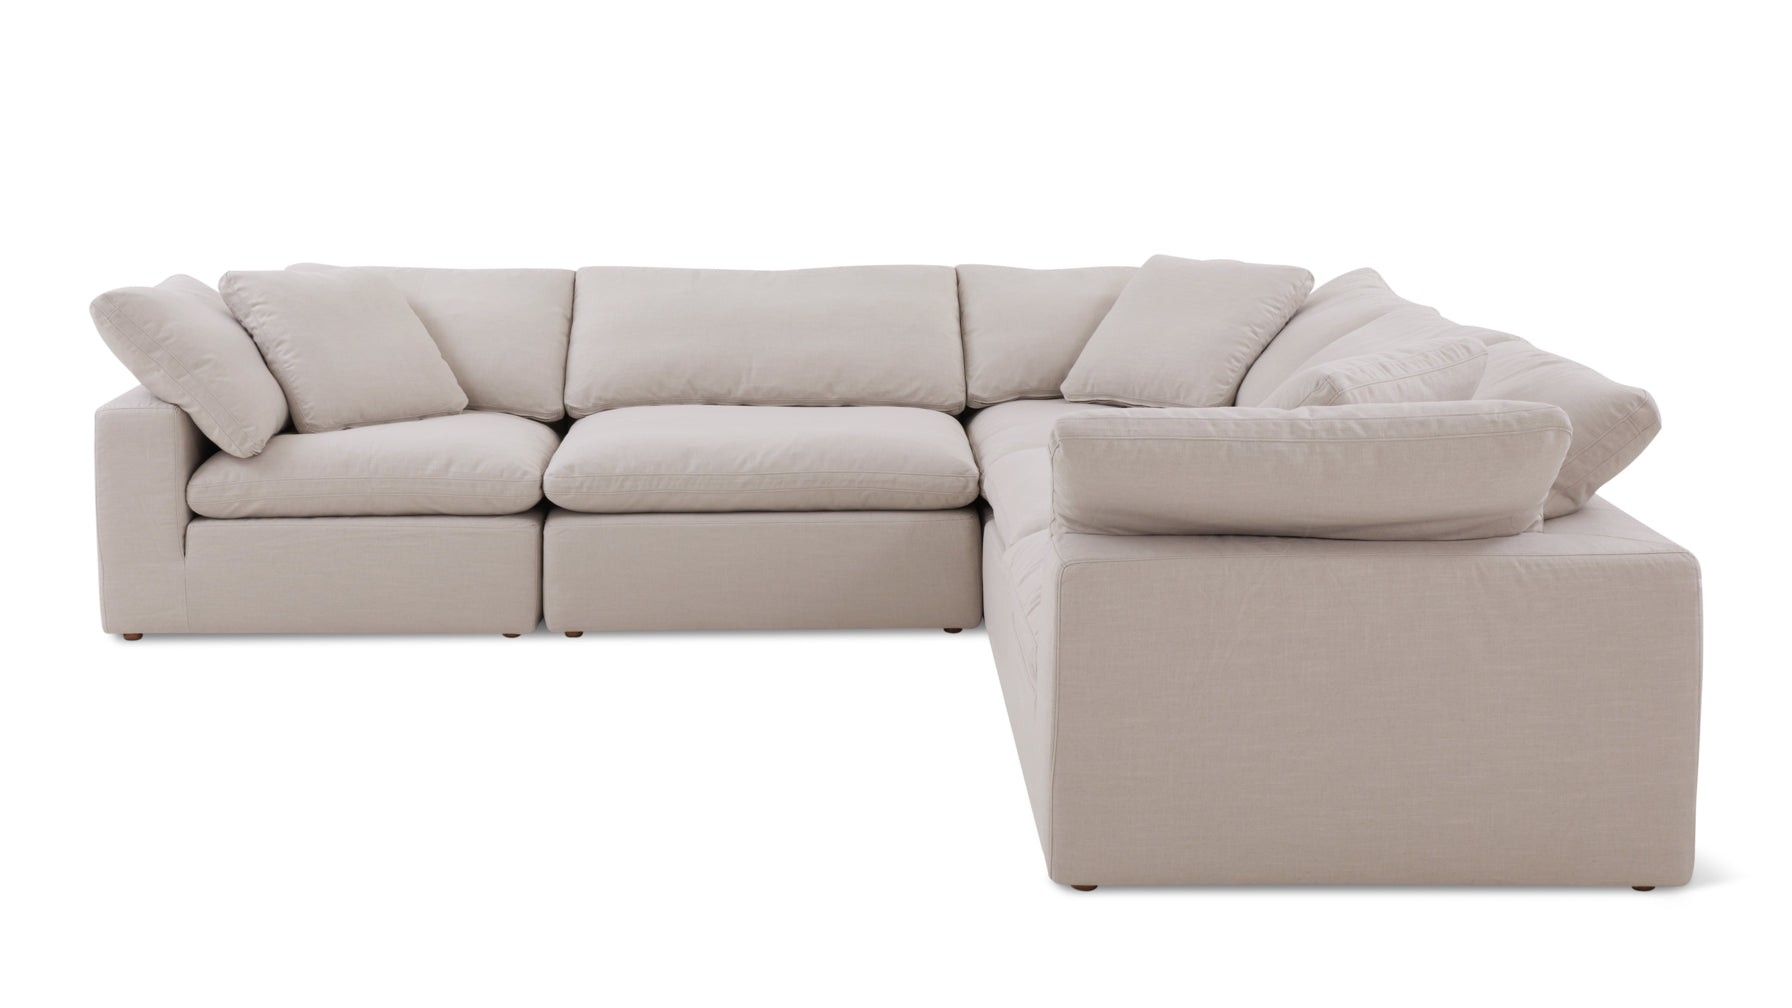 Movie Night™ 5-Piece Modular Sectional Closed, Large, Clay - Image 1